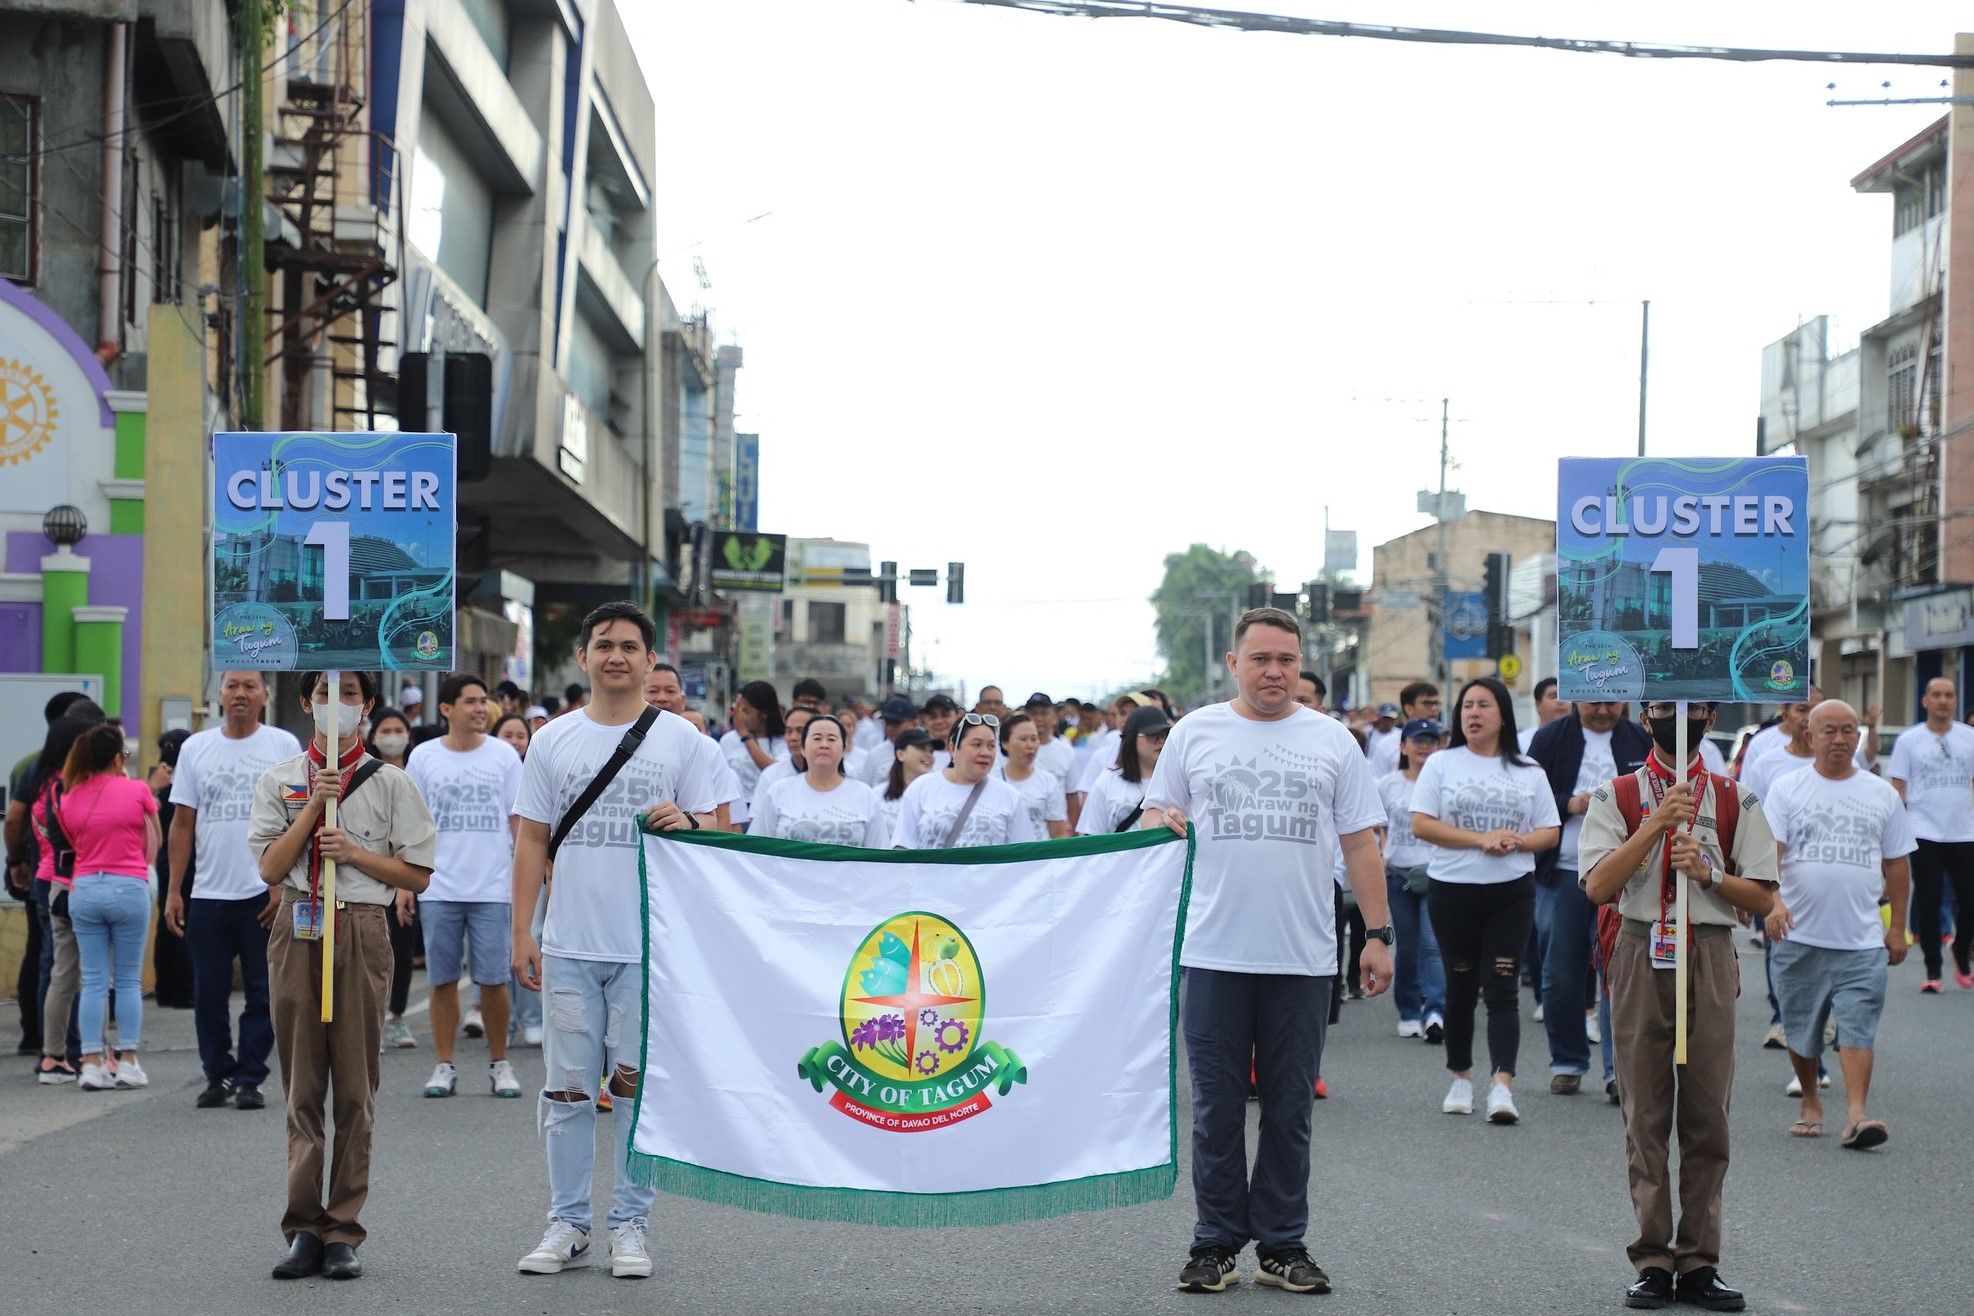 26th Araw ng Tagum – Commemoration and Appreciation of Unity and Harmony